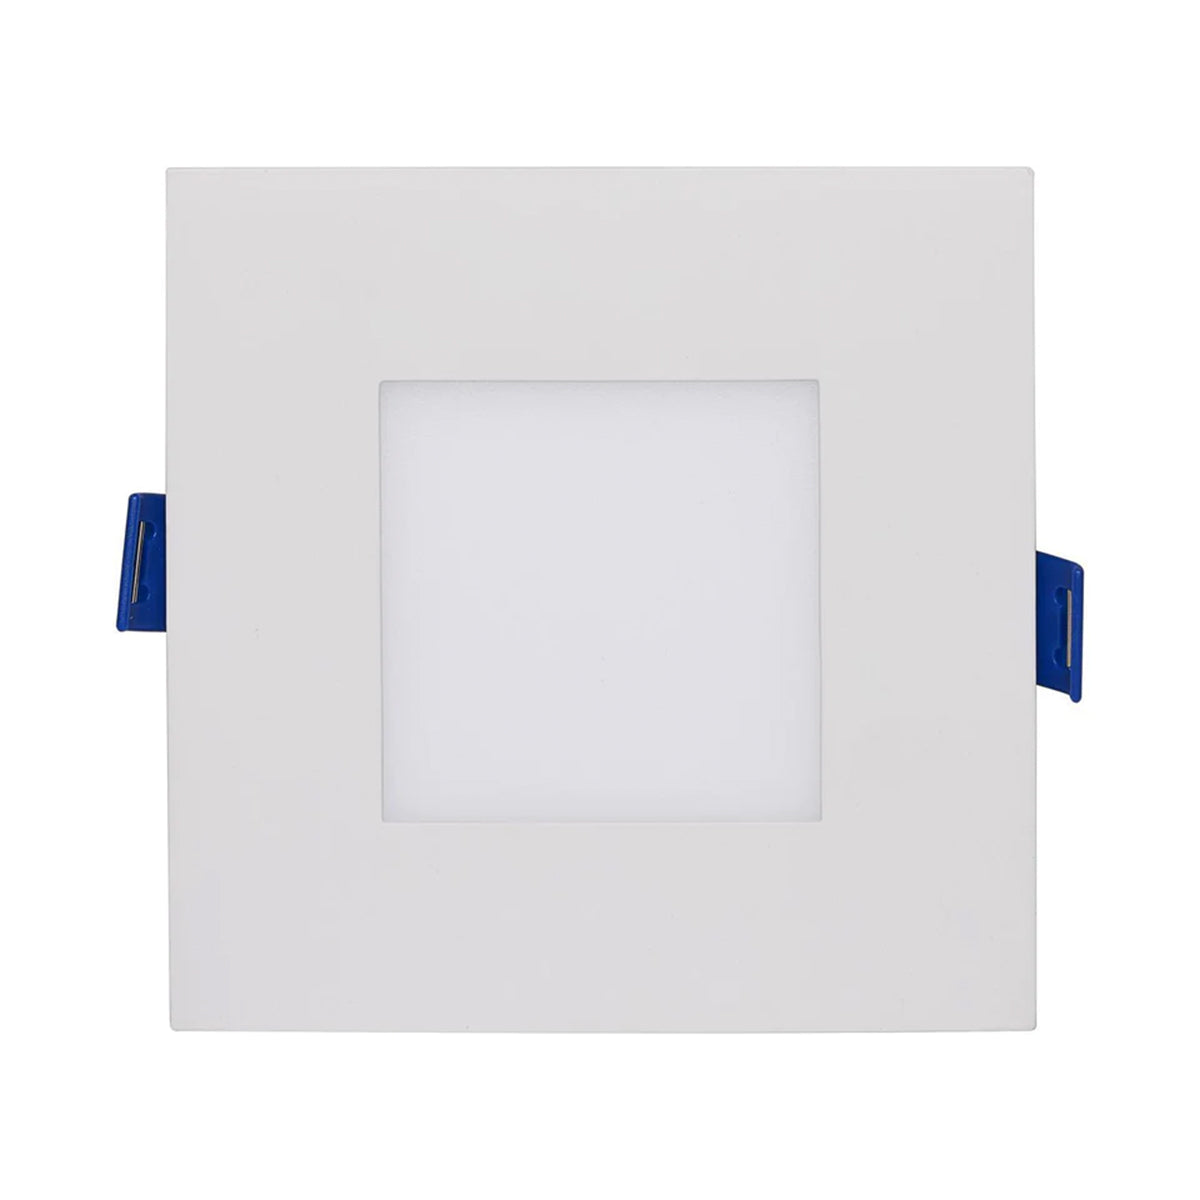 Satco Starfish, Flat Lens, 4 inch, Square Smart Canless LED Recessed Light, 9 Watt, 540 Lumens, Selectable CCT 2000K to 5000K RGB/Tunable White